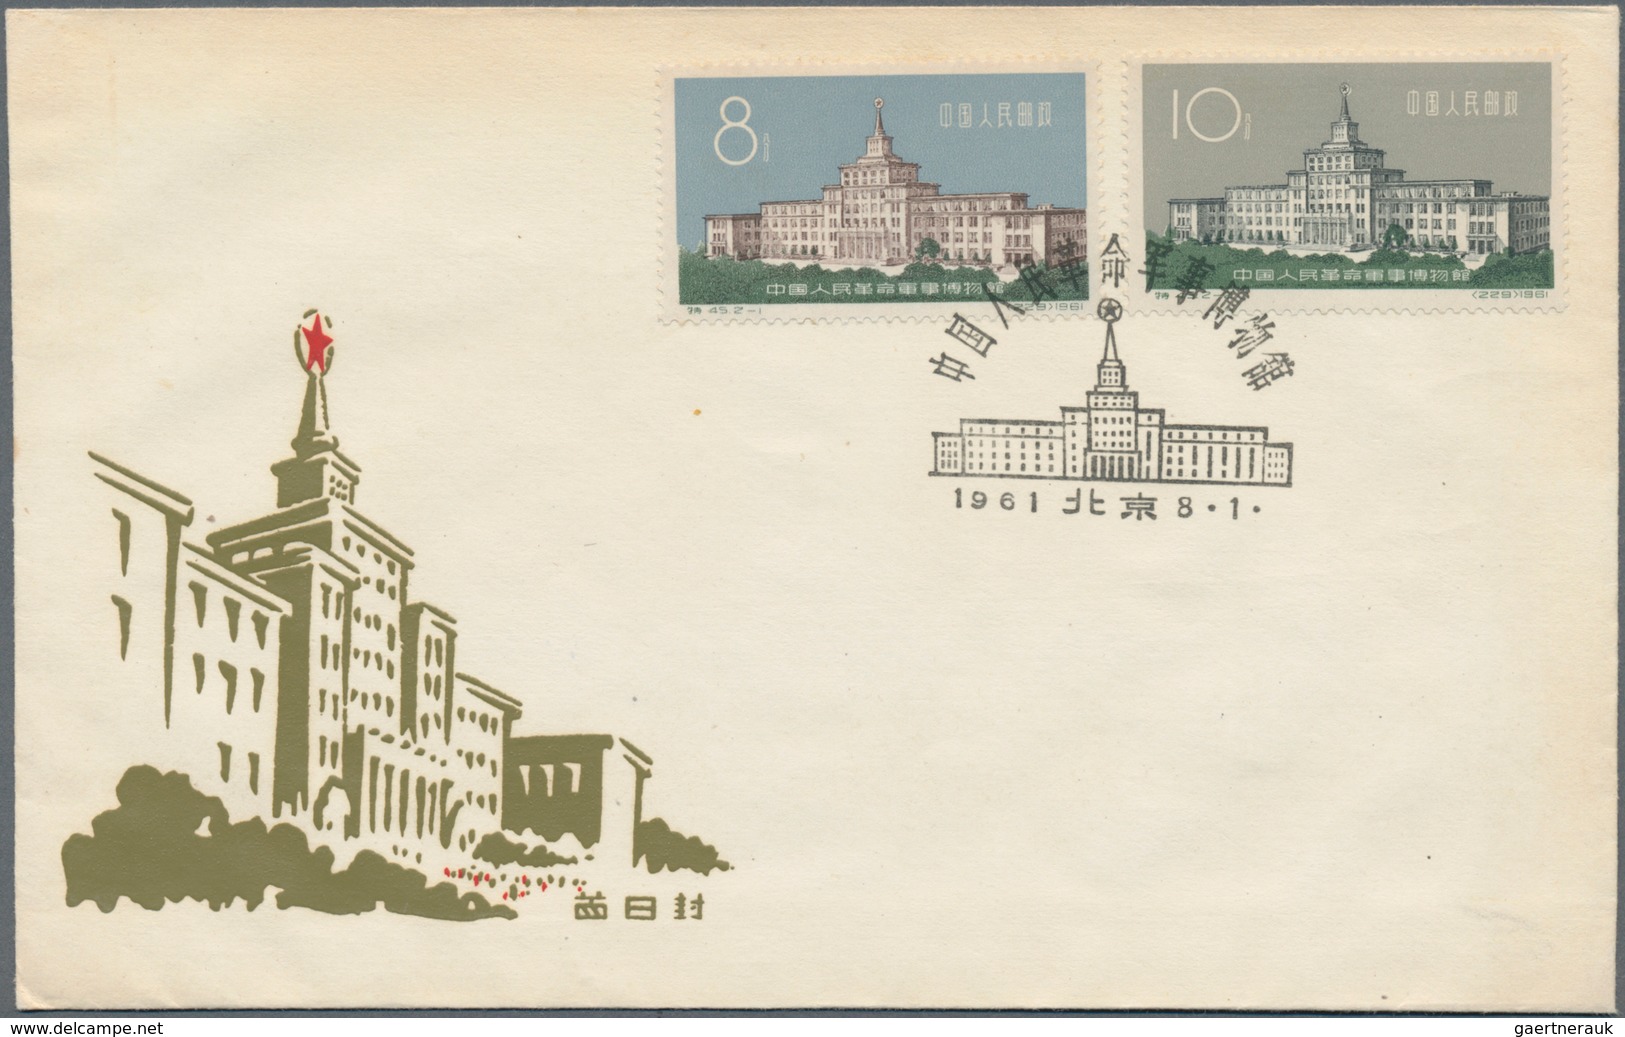 China - Volksrepublik: 1961, 5 First Day covers of C86, C87, C90, S45 and S47, bearing the full sets